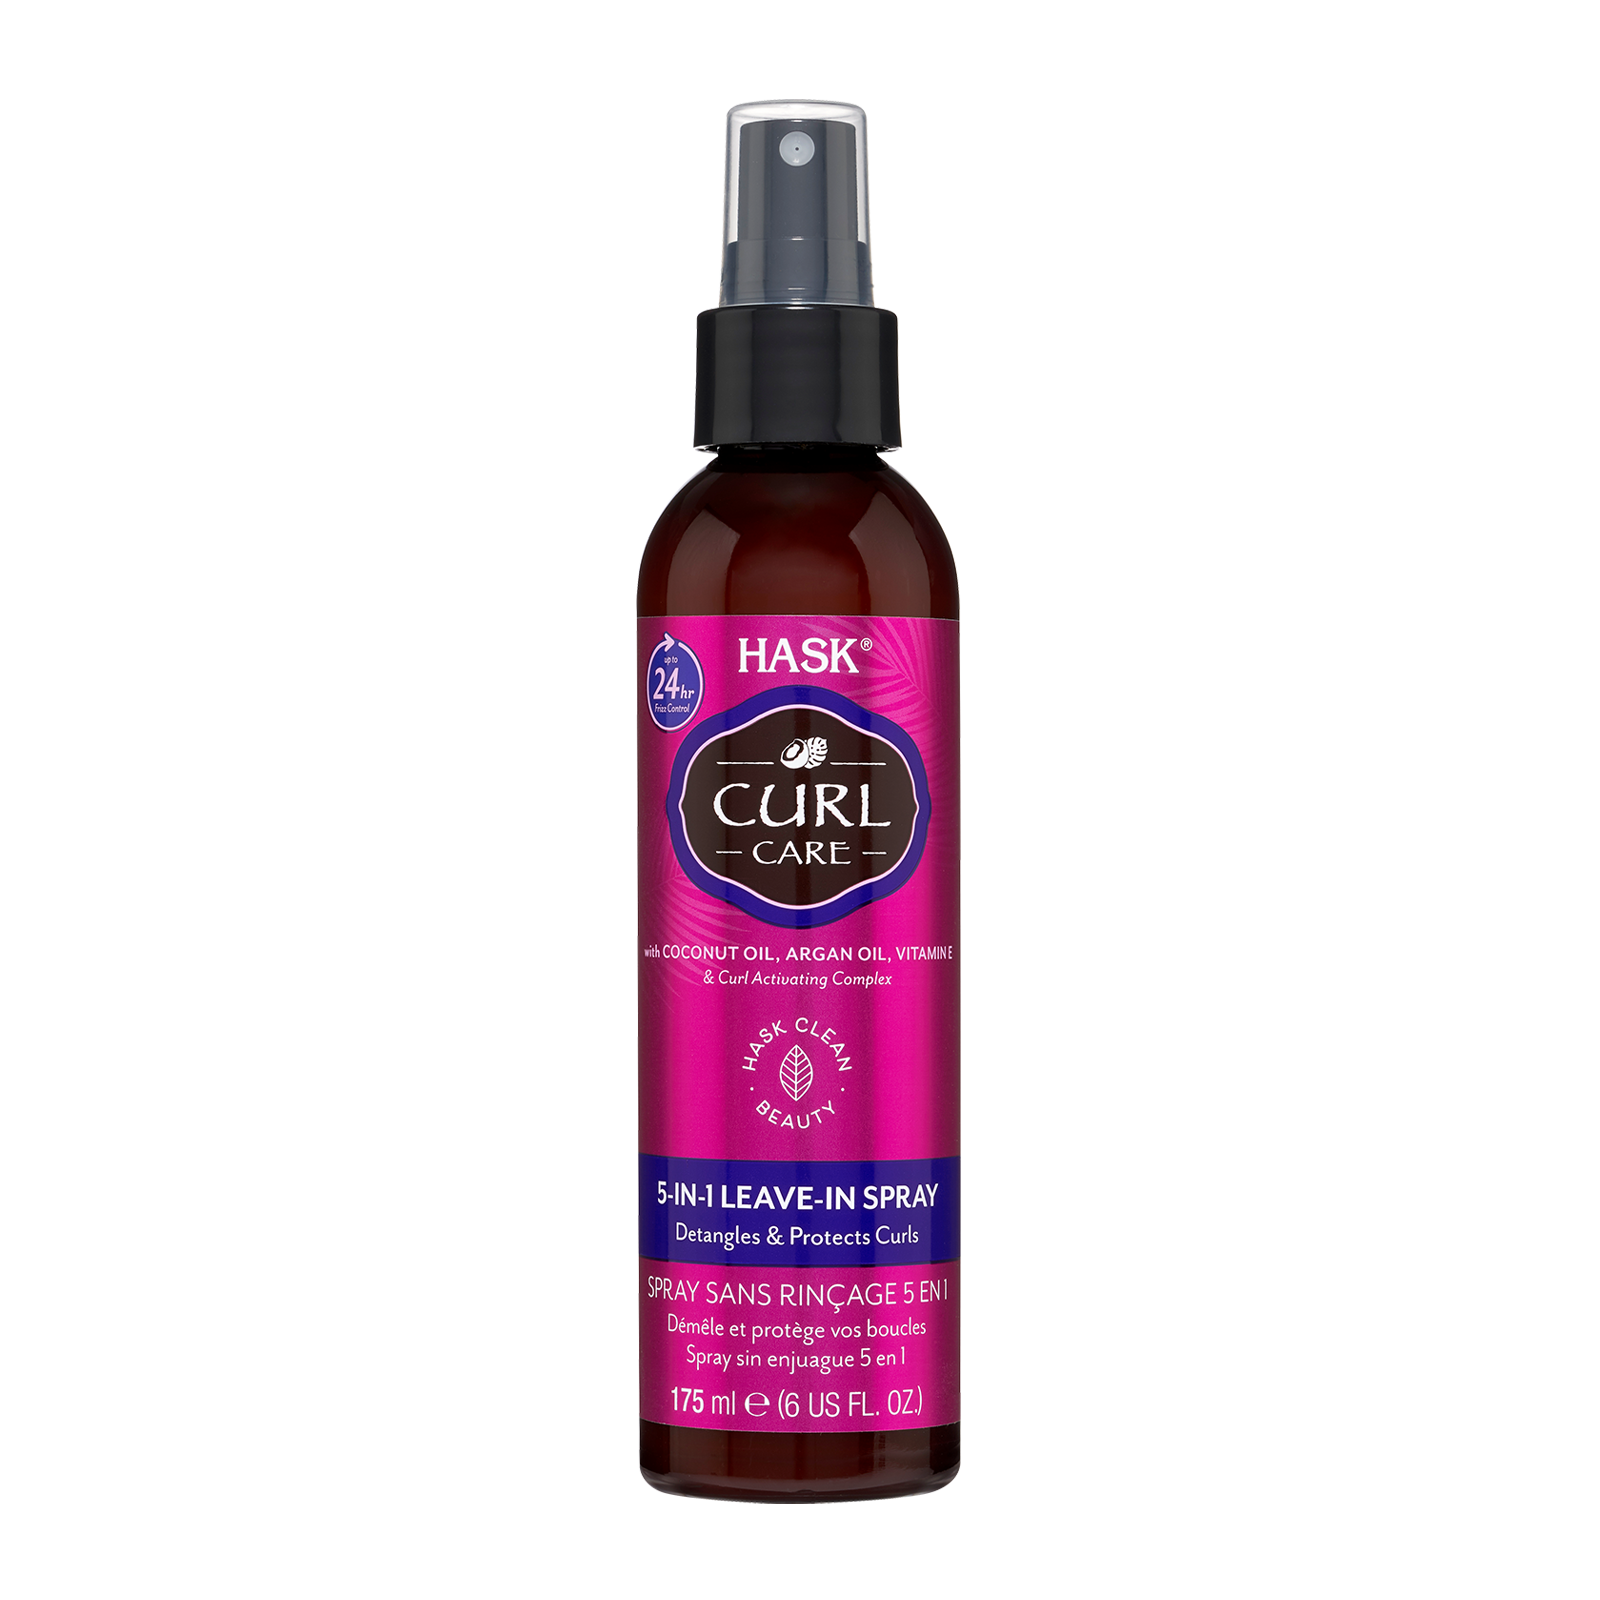 Curl Care 5-in-1 Leave-In Spray - HASK